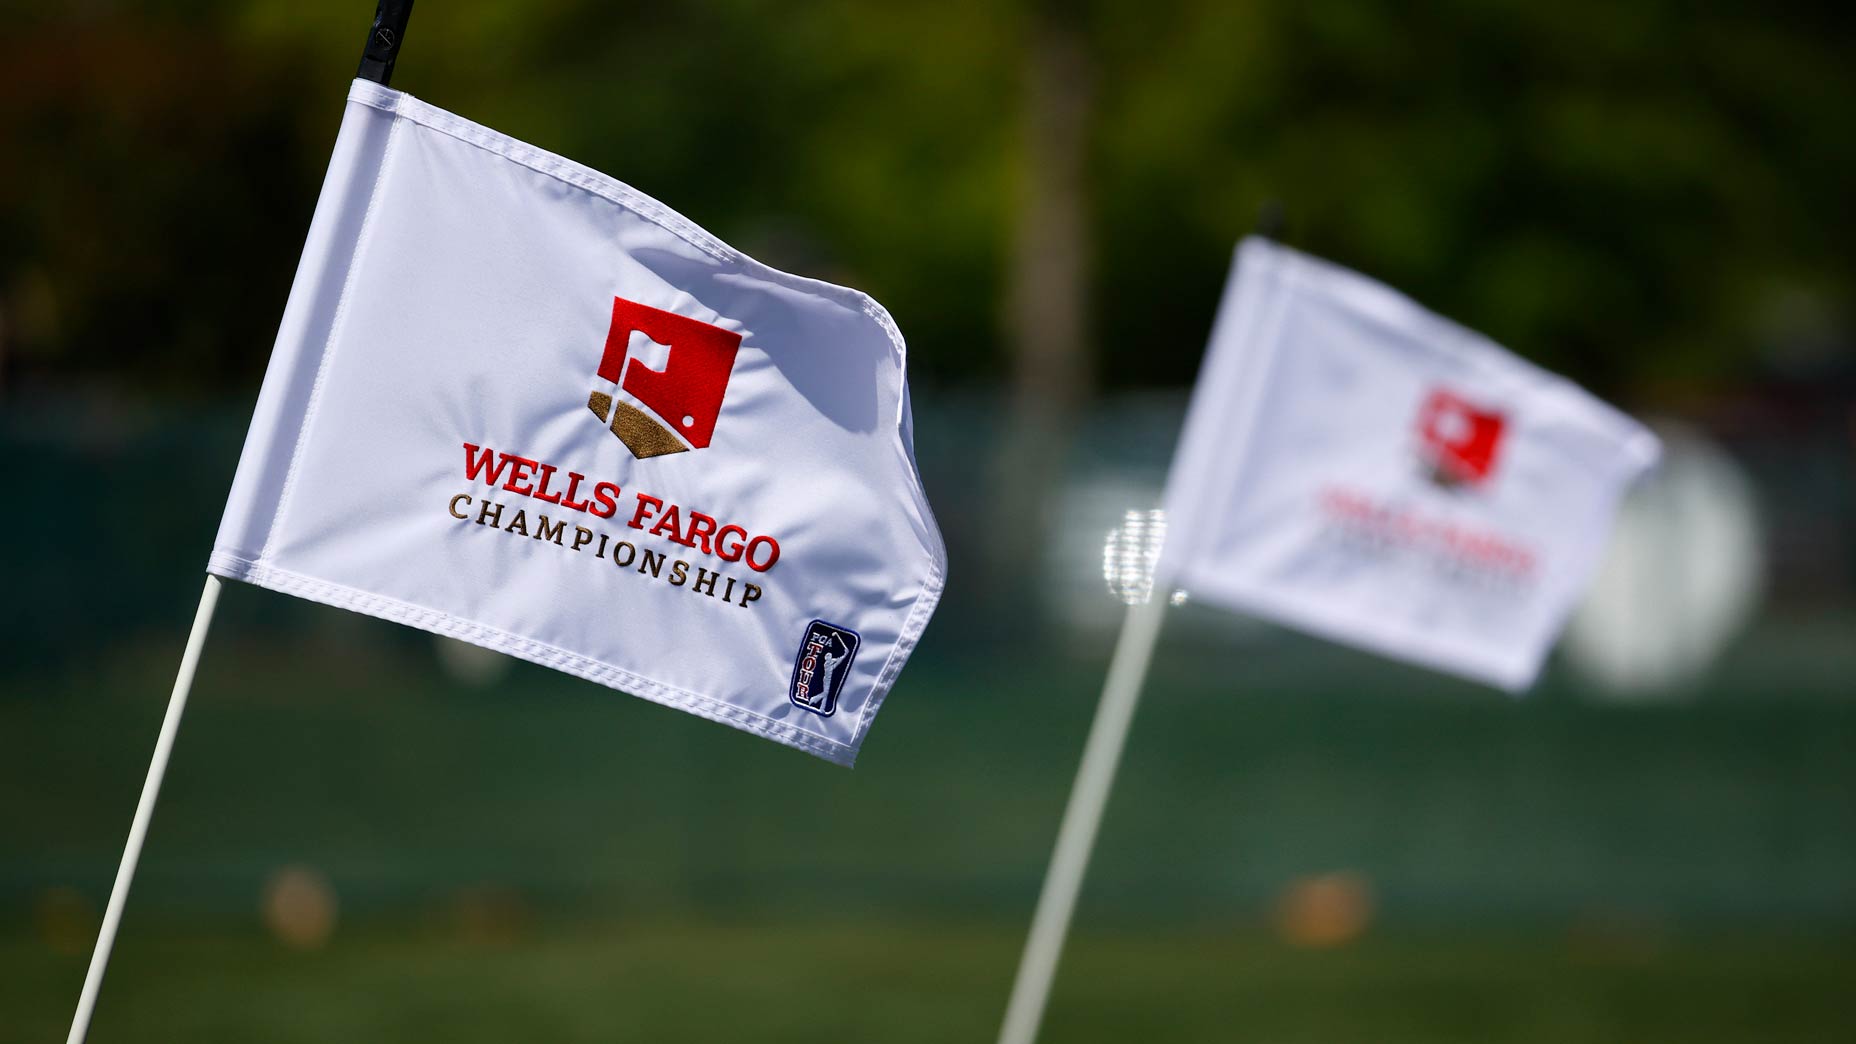 Two Wells Fargo Championship flags blow in breeze at Quail Hollow